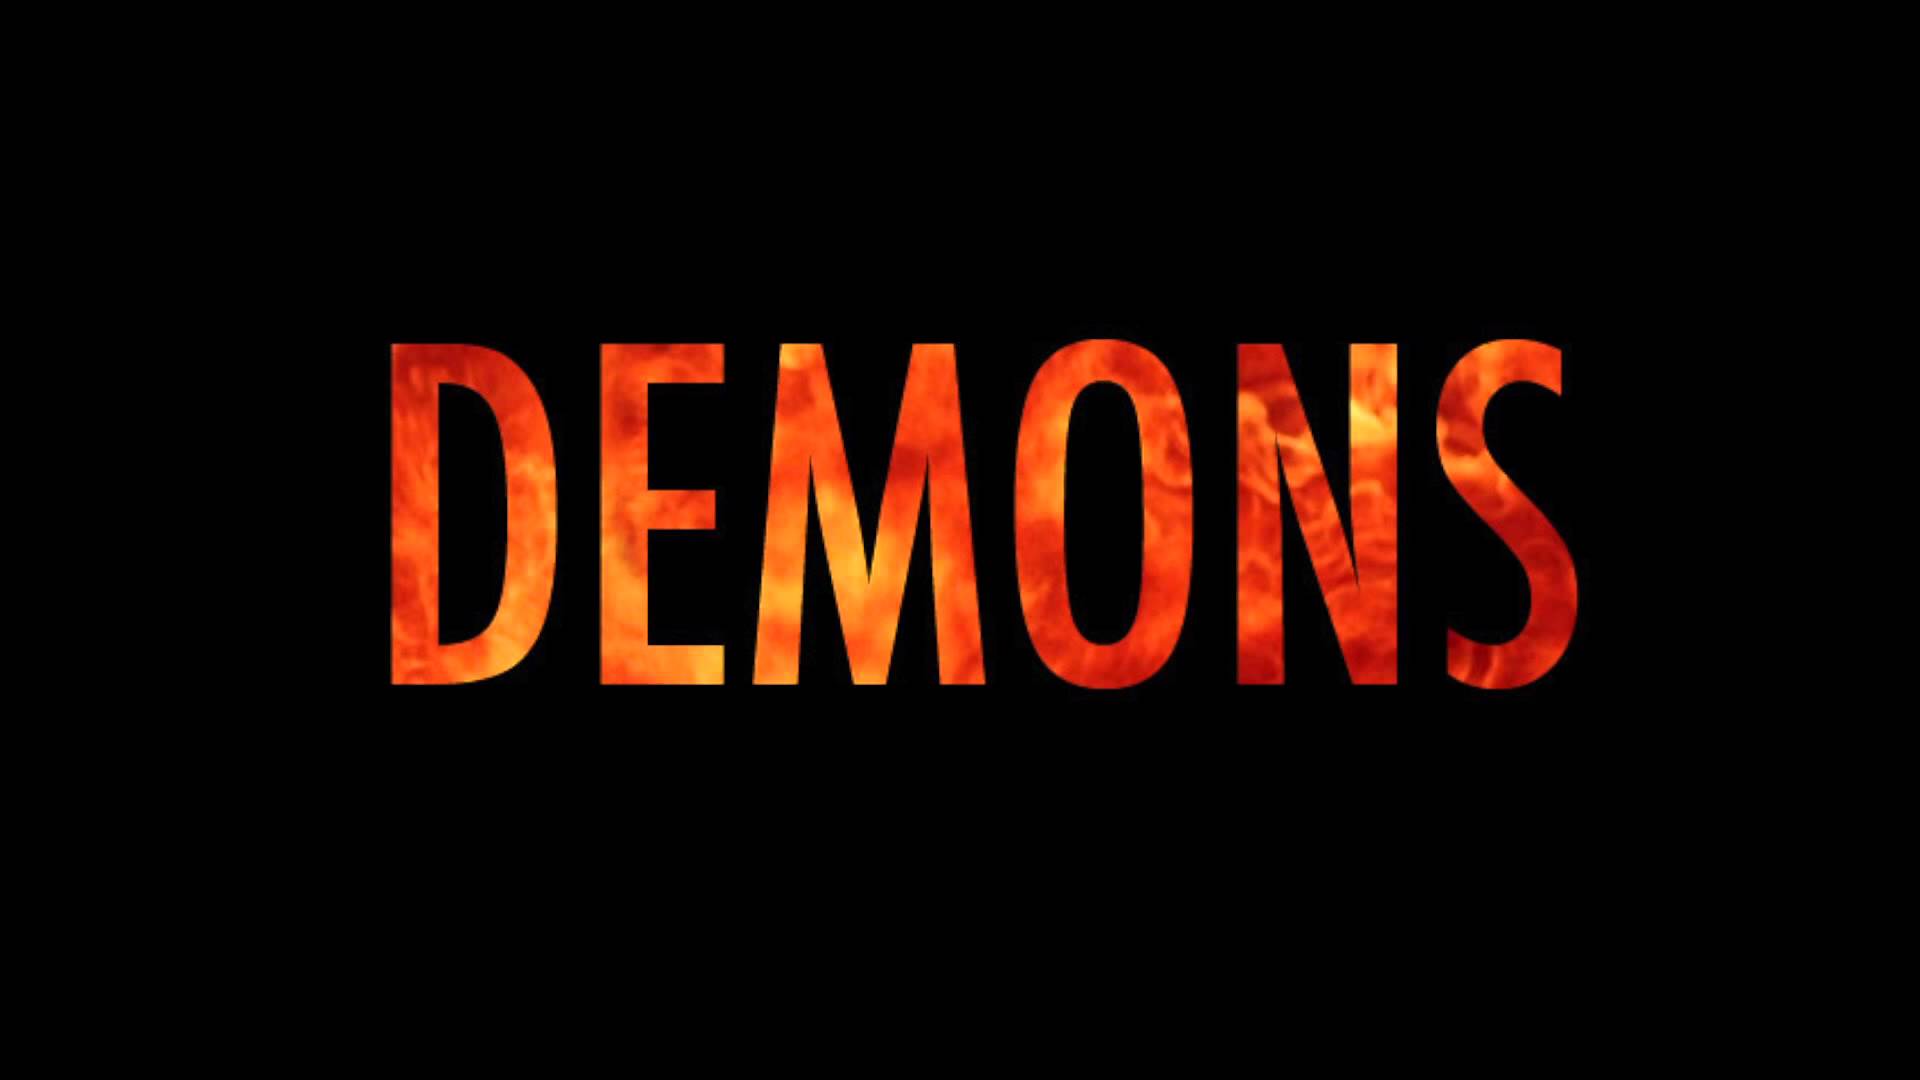 Free Download Demons Imagine Dragons A Cappella Cover 1920x1080 For Your Desktop Mobile Tablet Explore 90 Imagine Dragons 2018 Wallpapers Imagine Dragons 2018 Wallpapers Imagine Dragons Wallpaper Imagine Dragons Iphone Wallpaper Customize and personalise your desktop, mobile phone and tablet with these free wallpapers! imagine dragons iphone wallpaper